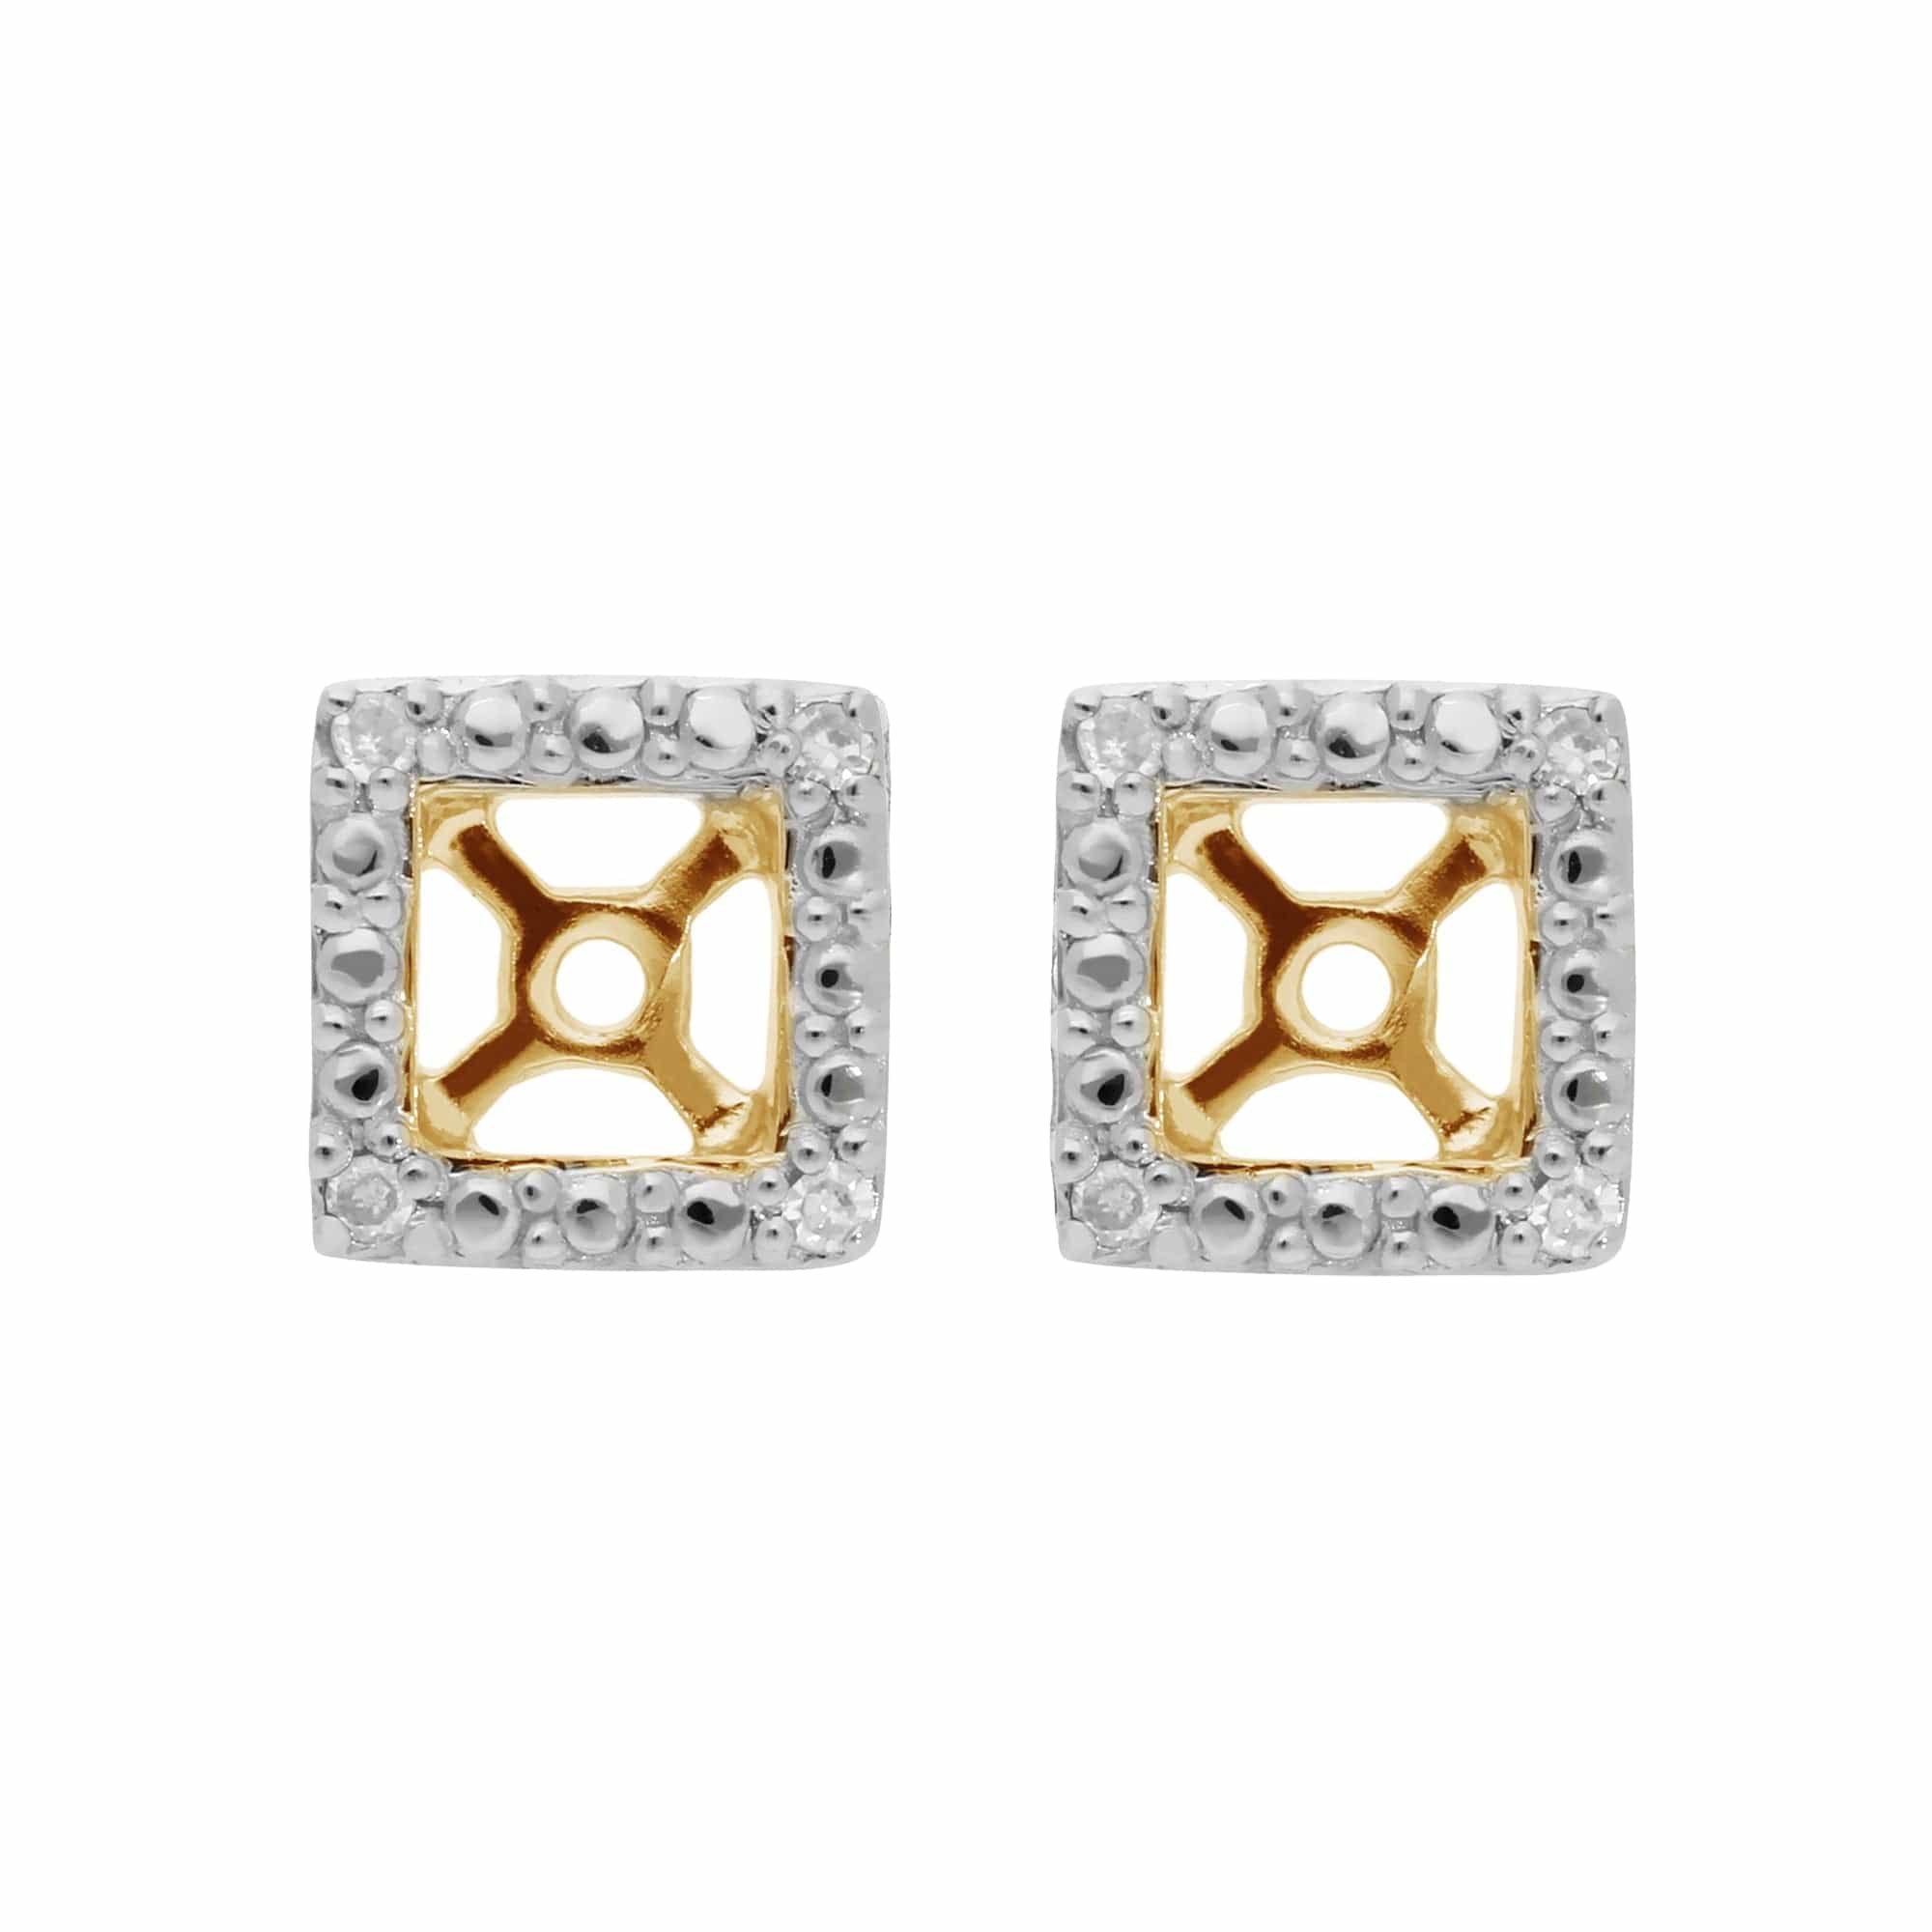 Classic Round Sapphire Stud Earrings with Detachable Diamond Square Earrings Jacket Set in 9ct Yellow Gold - Gemondo